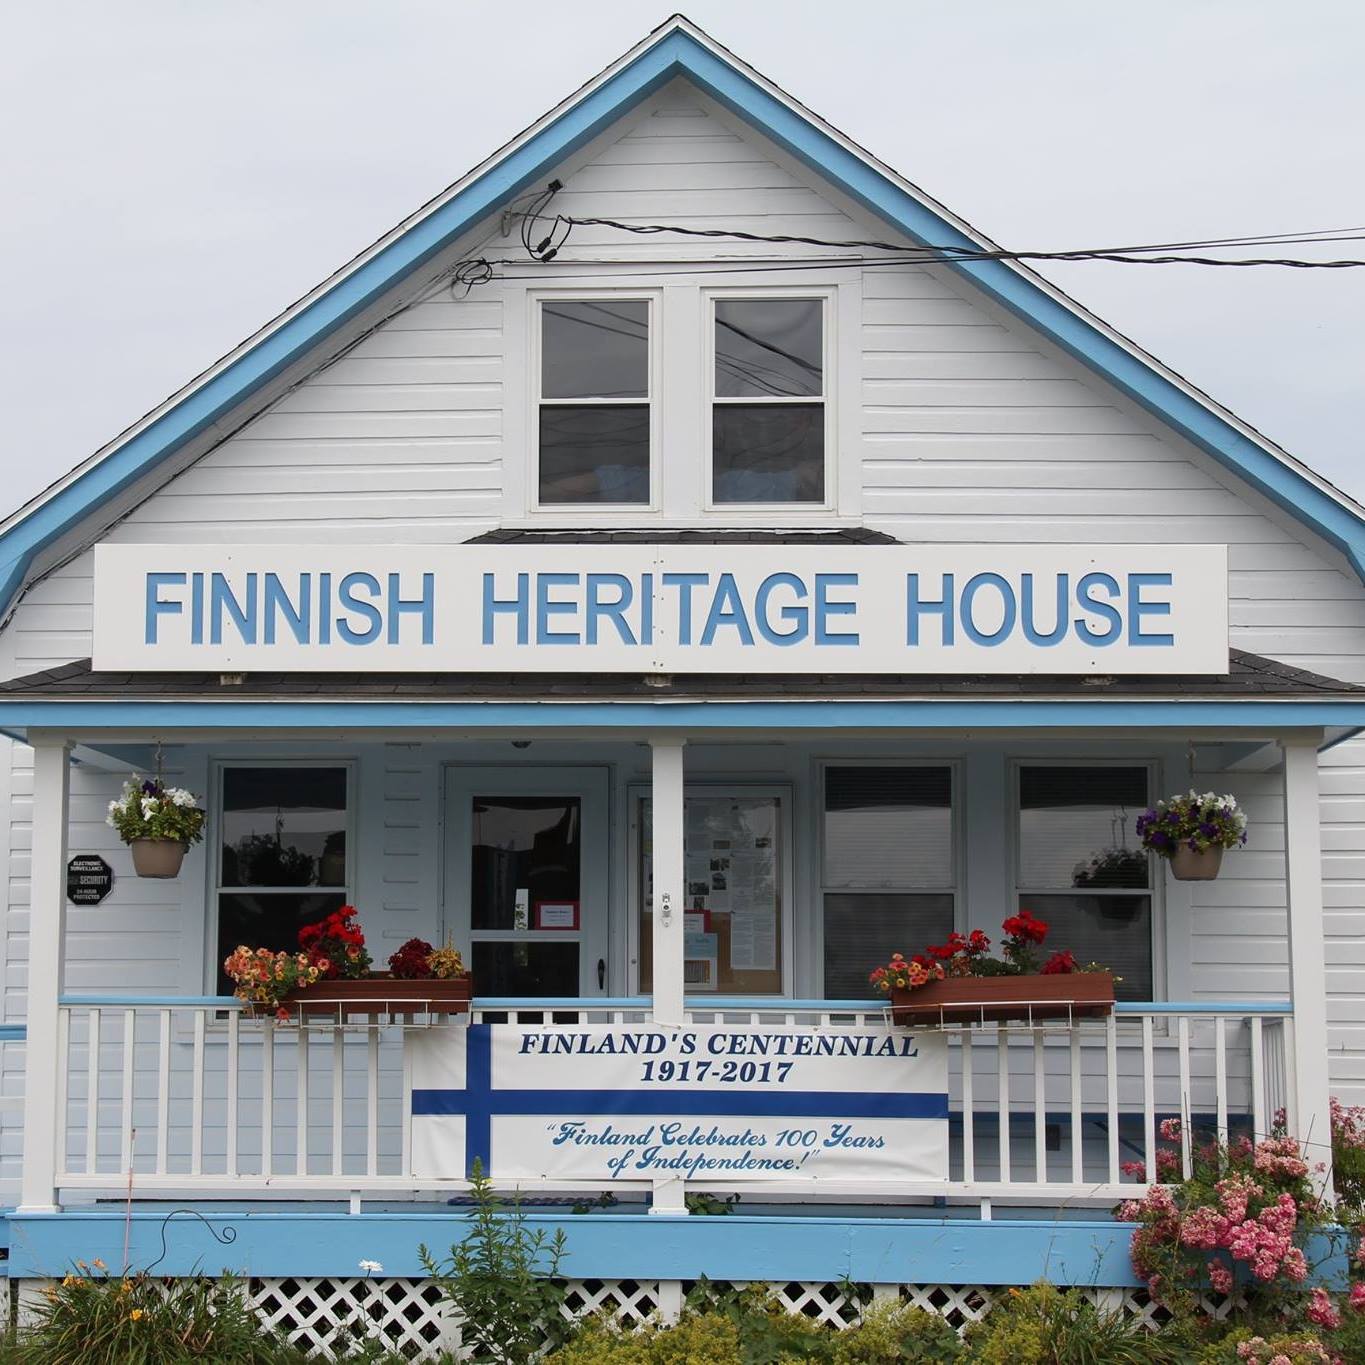 Finnish Cultural Organizations in USA - Finnish Heritage House